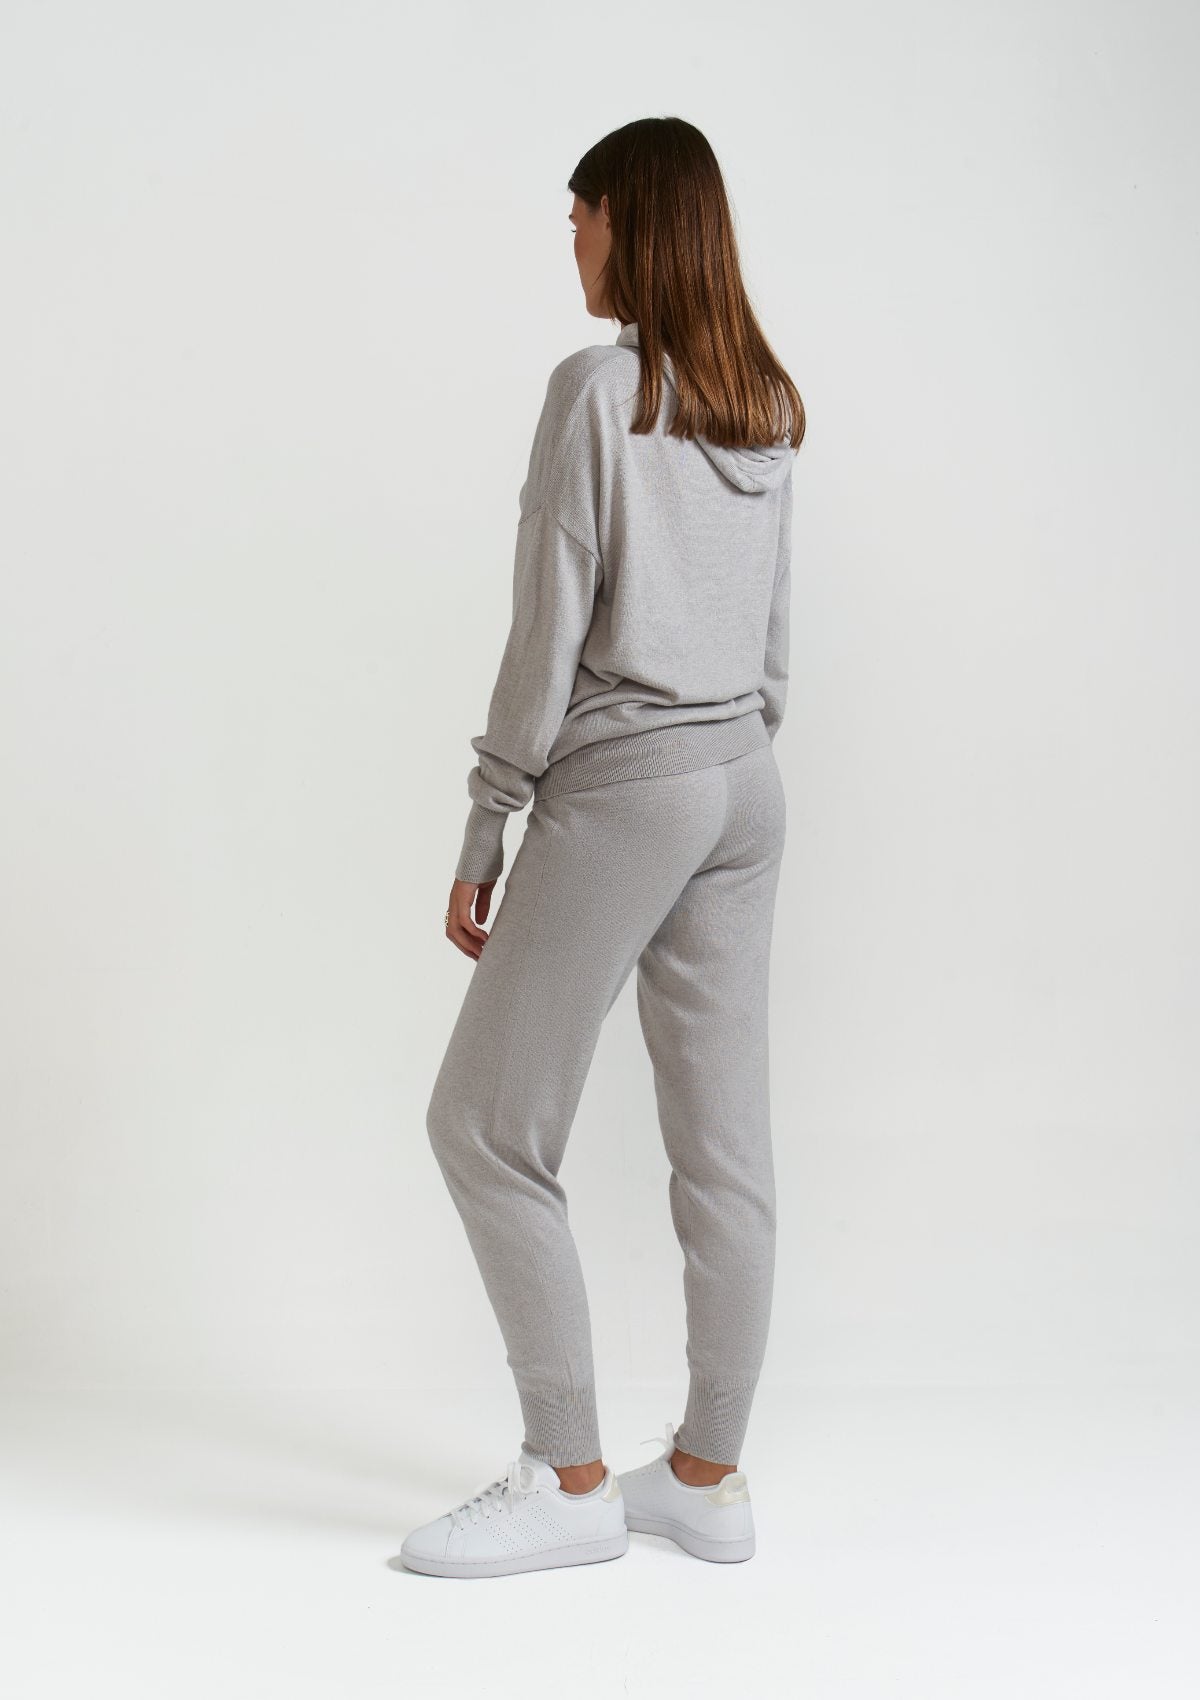 cashmere blend-luxurious-trousers-grey-knitted-Silk & tonic